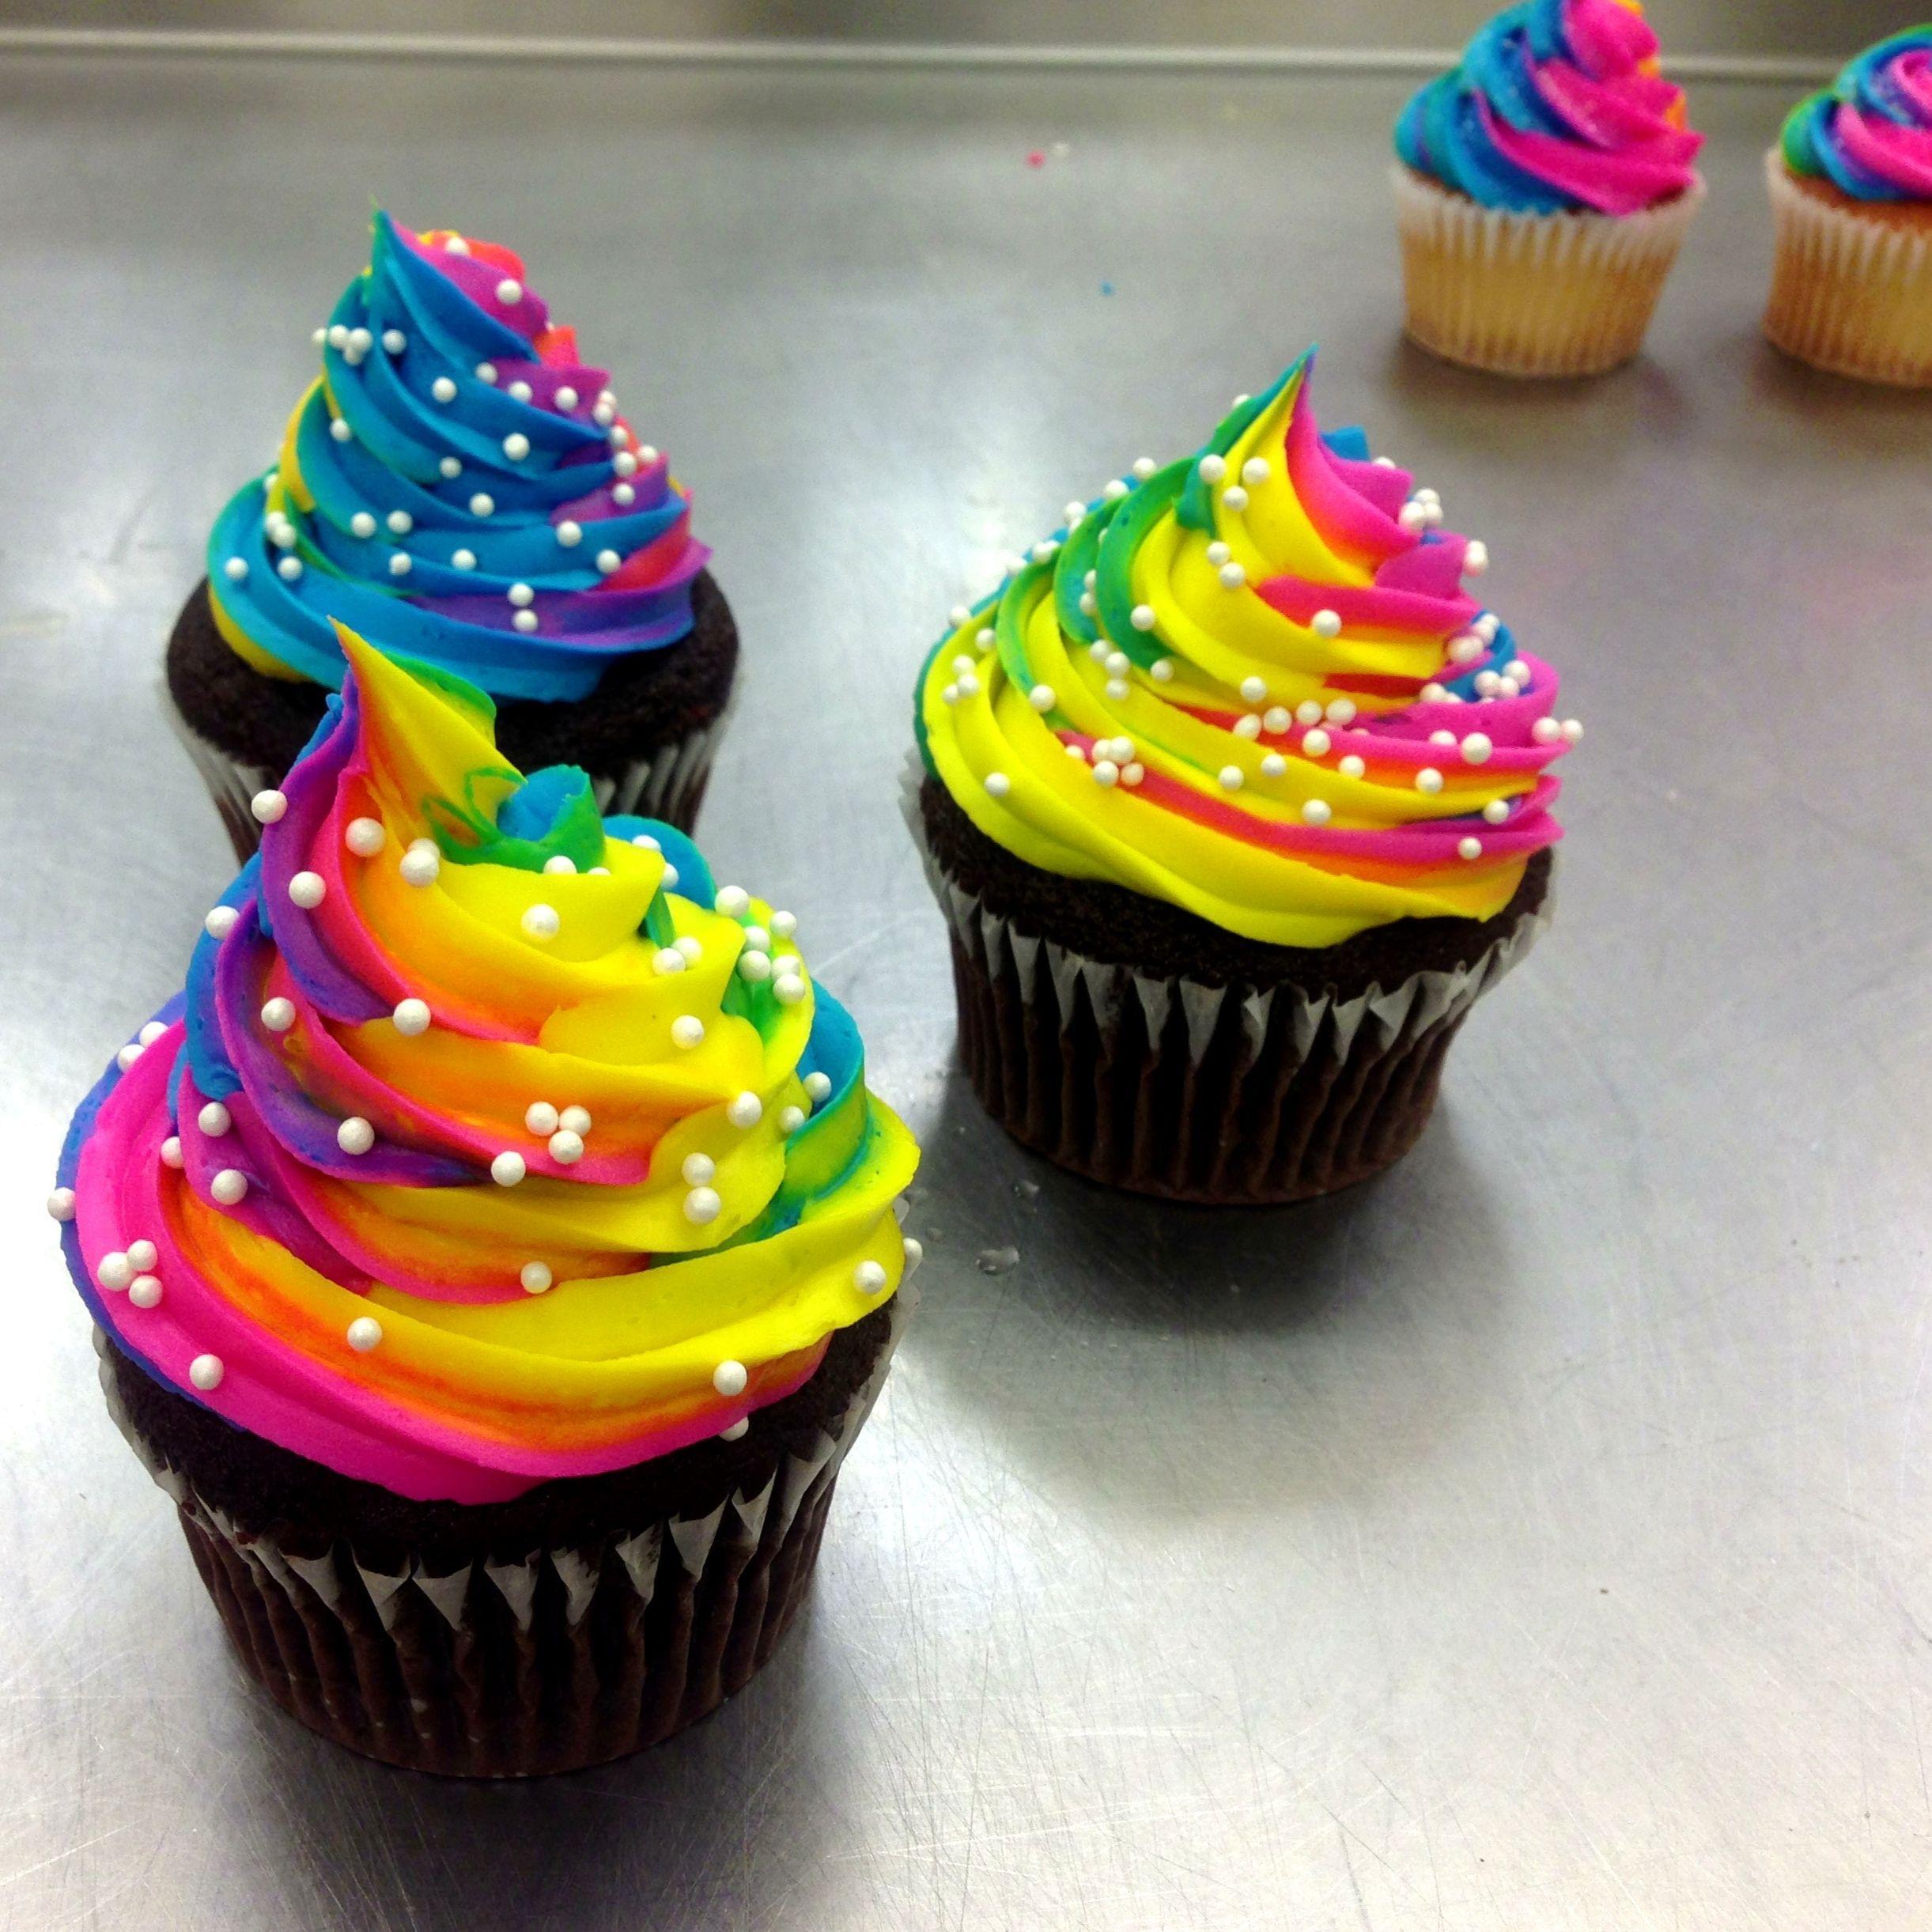 Rainbow Cupcakes : Rainbow cupcakes - Make a rainbow cake out of mini ...